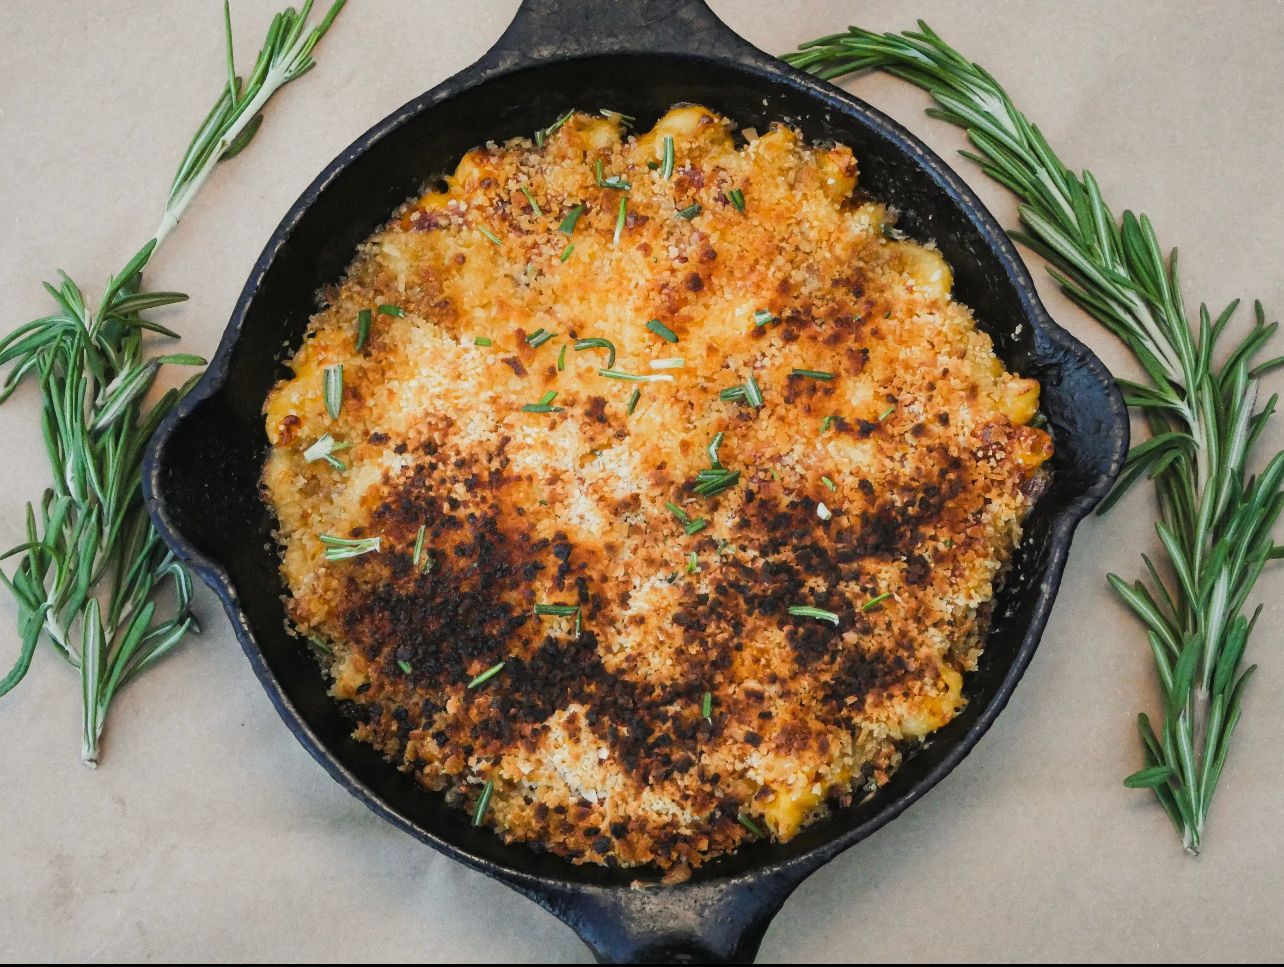 Smoky Baked Mac & Cheese by The Original Cold Smoked